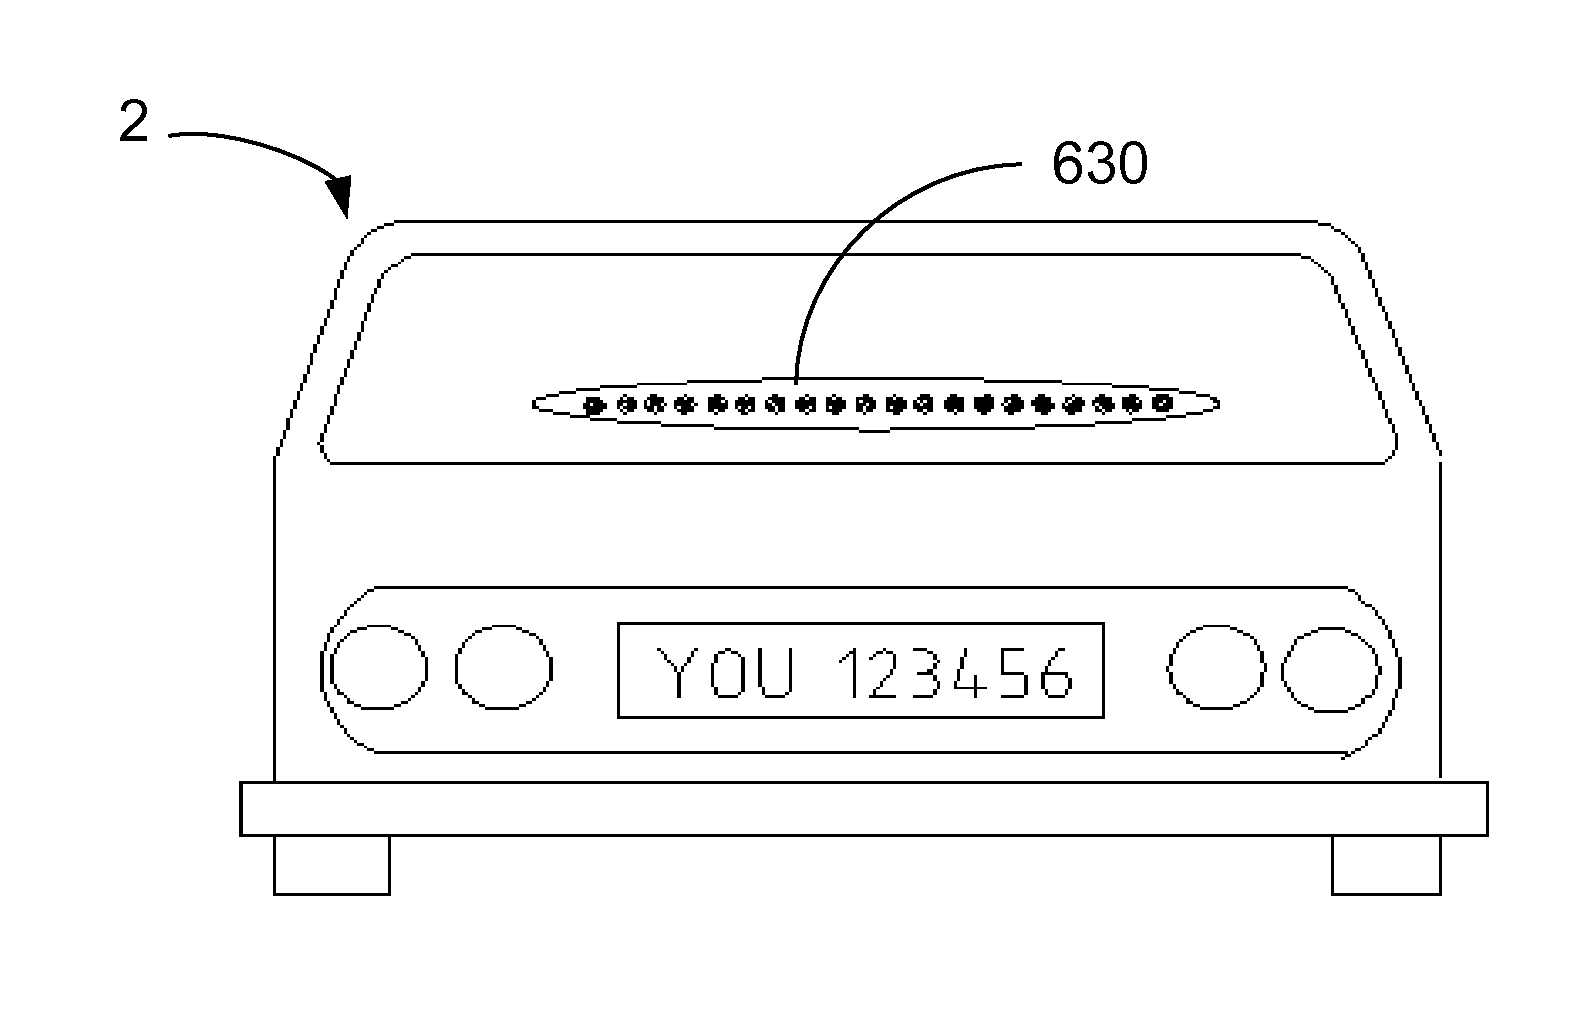 Emergency stop signal device for motor vehicle